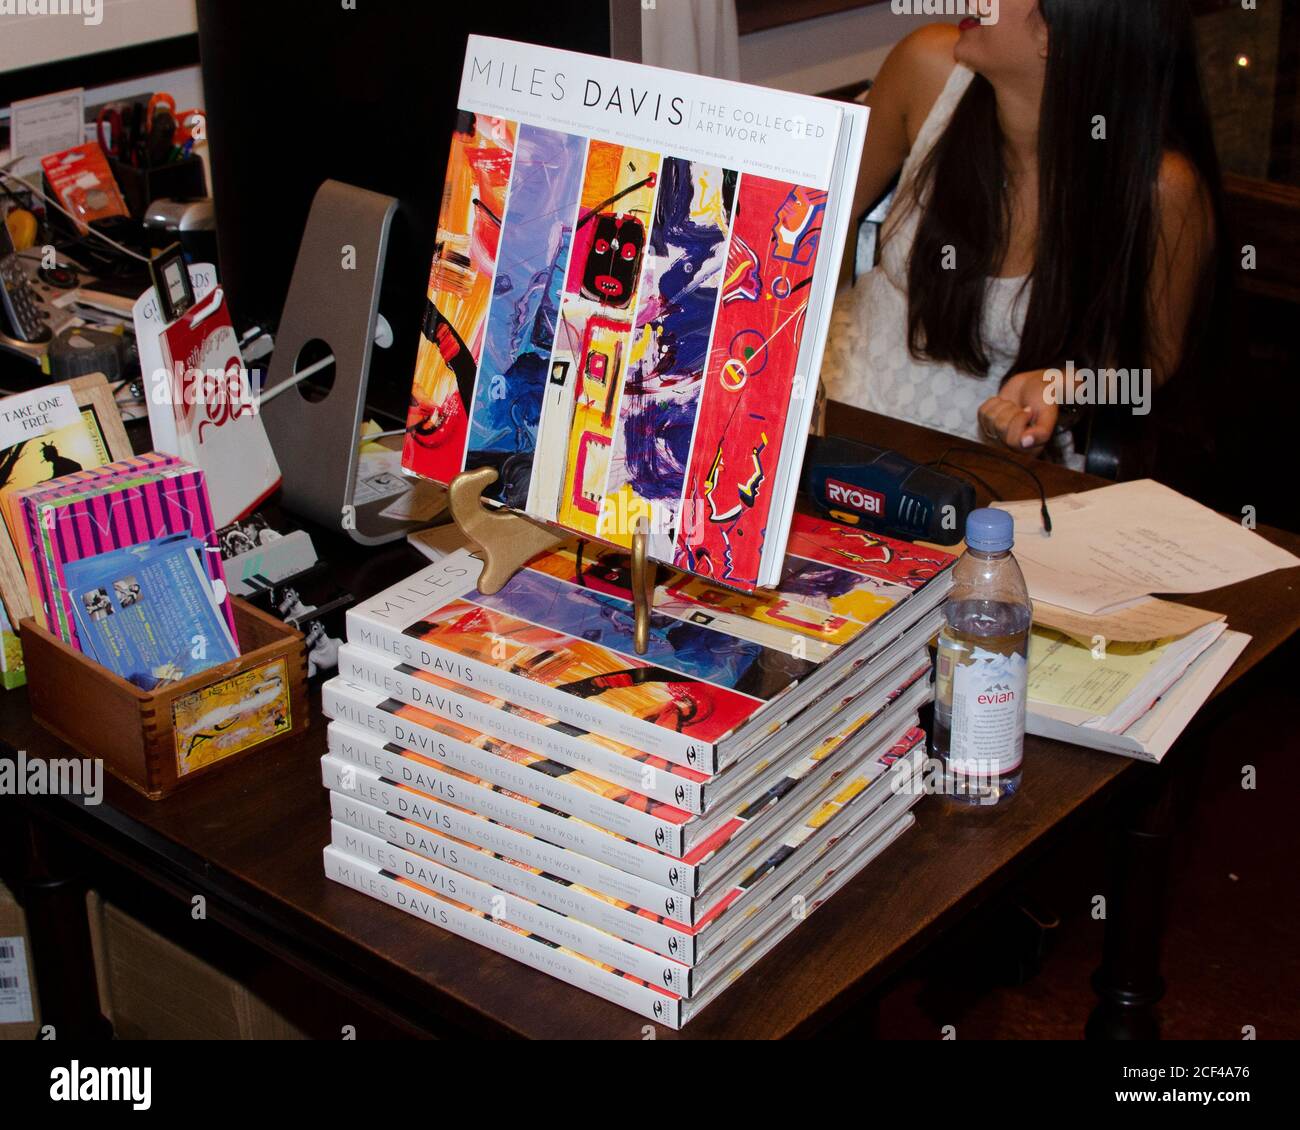 November 7, 2013, Hollywood, California, USA: A stack of ''Miles Davis: The Collected Artwork'' books at the  ''Miles Davis: The Collected Artwork'' Launch Party. (Credit Image: © Billy Bennight/ZUMA Wire) Stock Photo